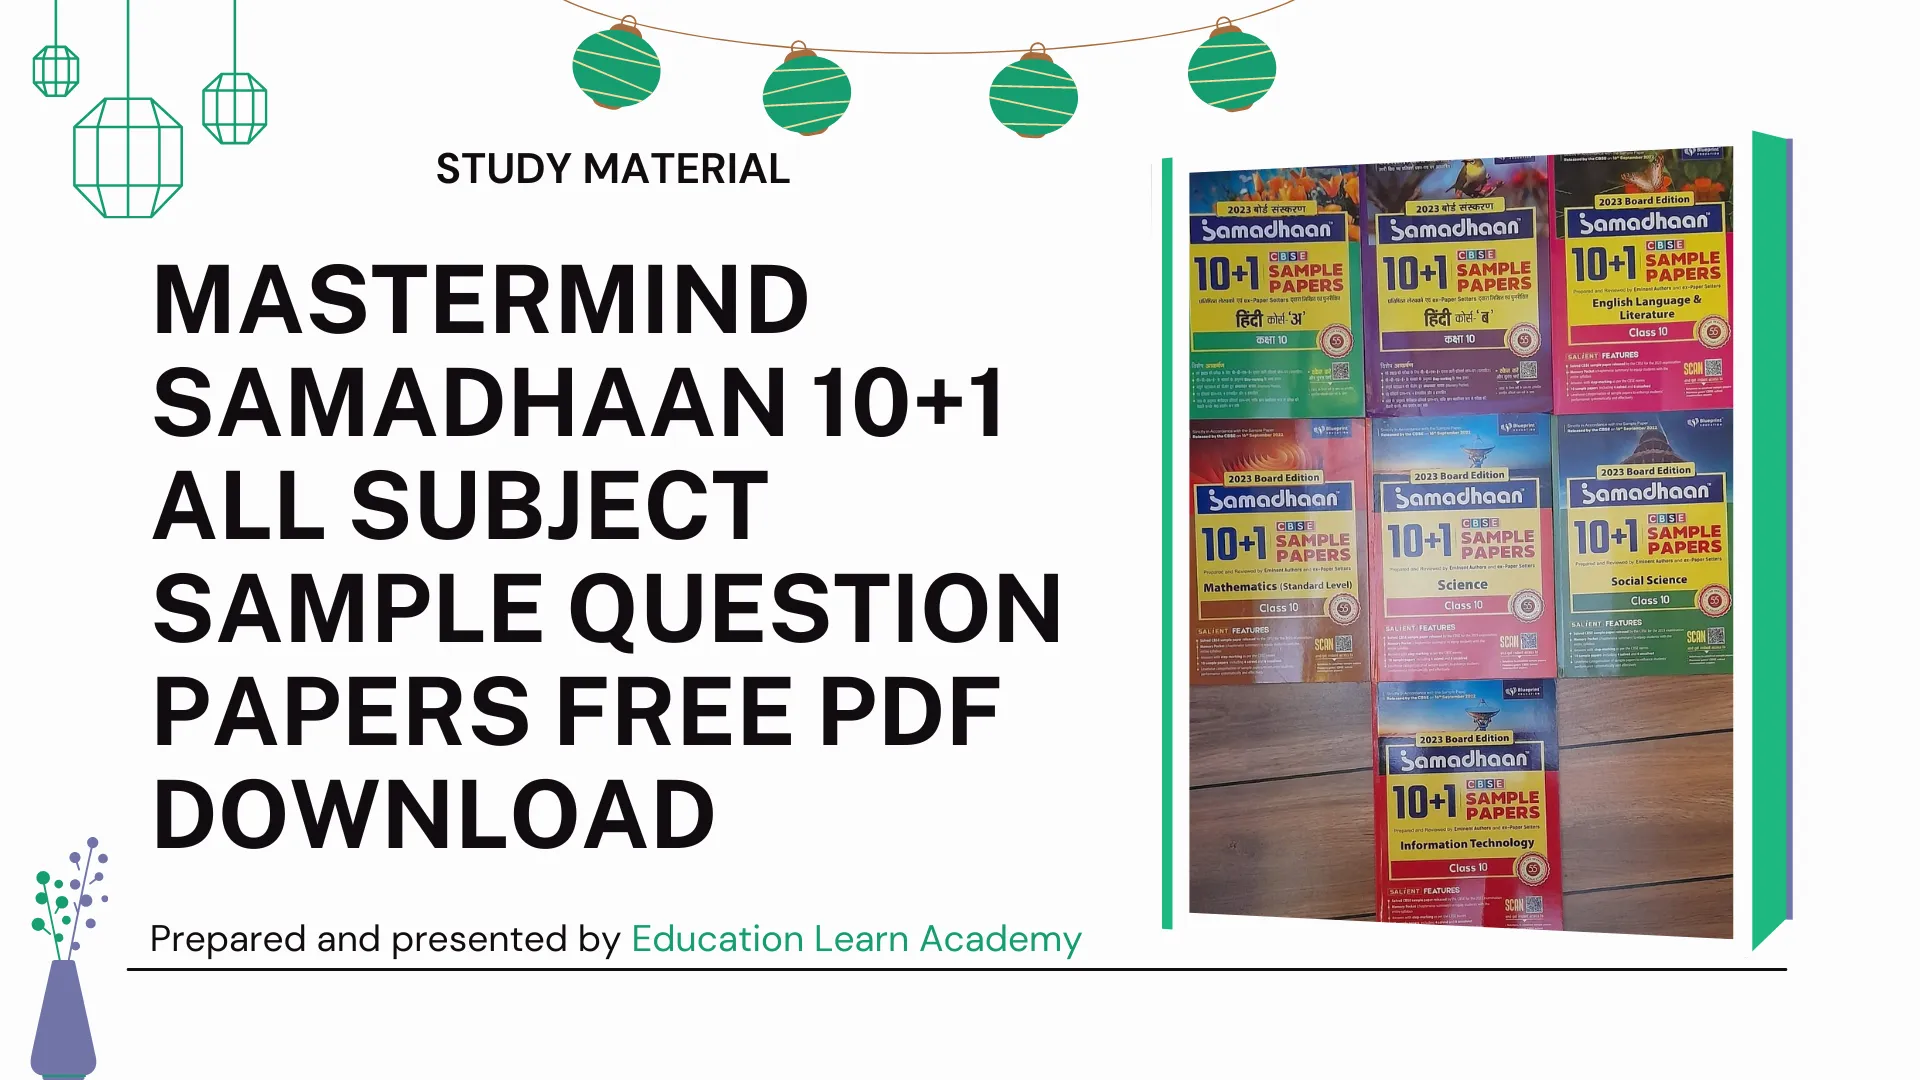 MASTERMIND SAMADHAAN 10+1 All Subject SAMPLE QUESTION PAPERS Free Pdf Download